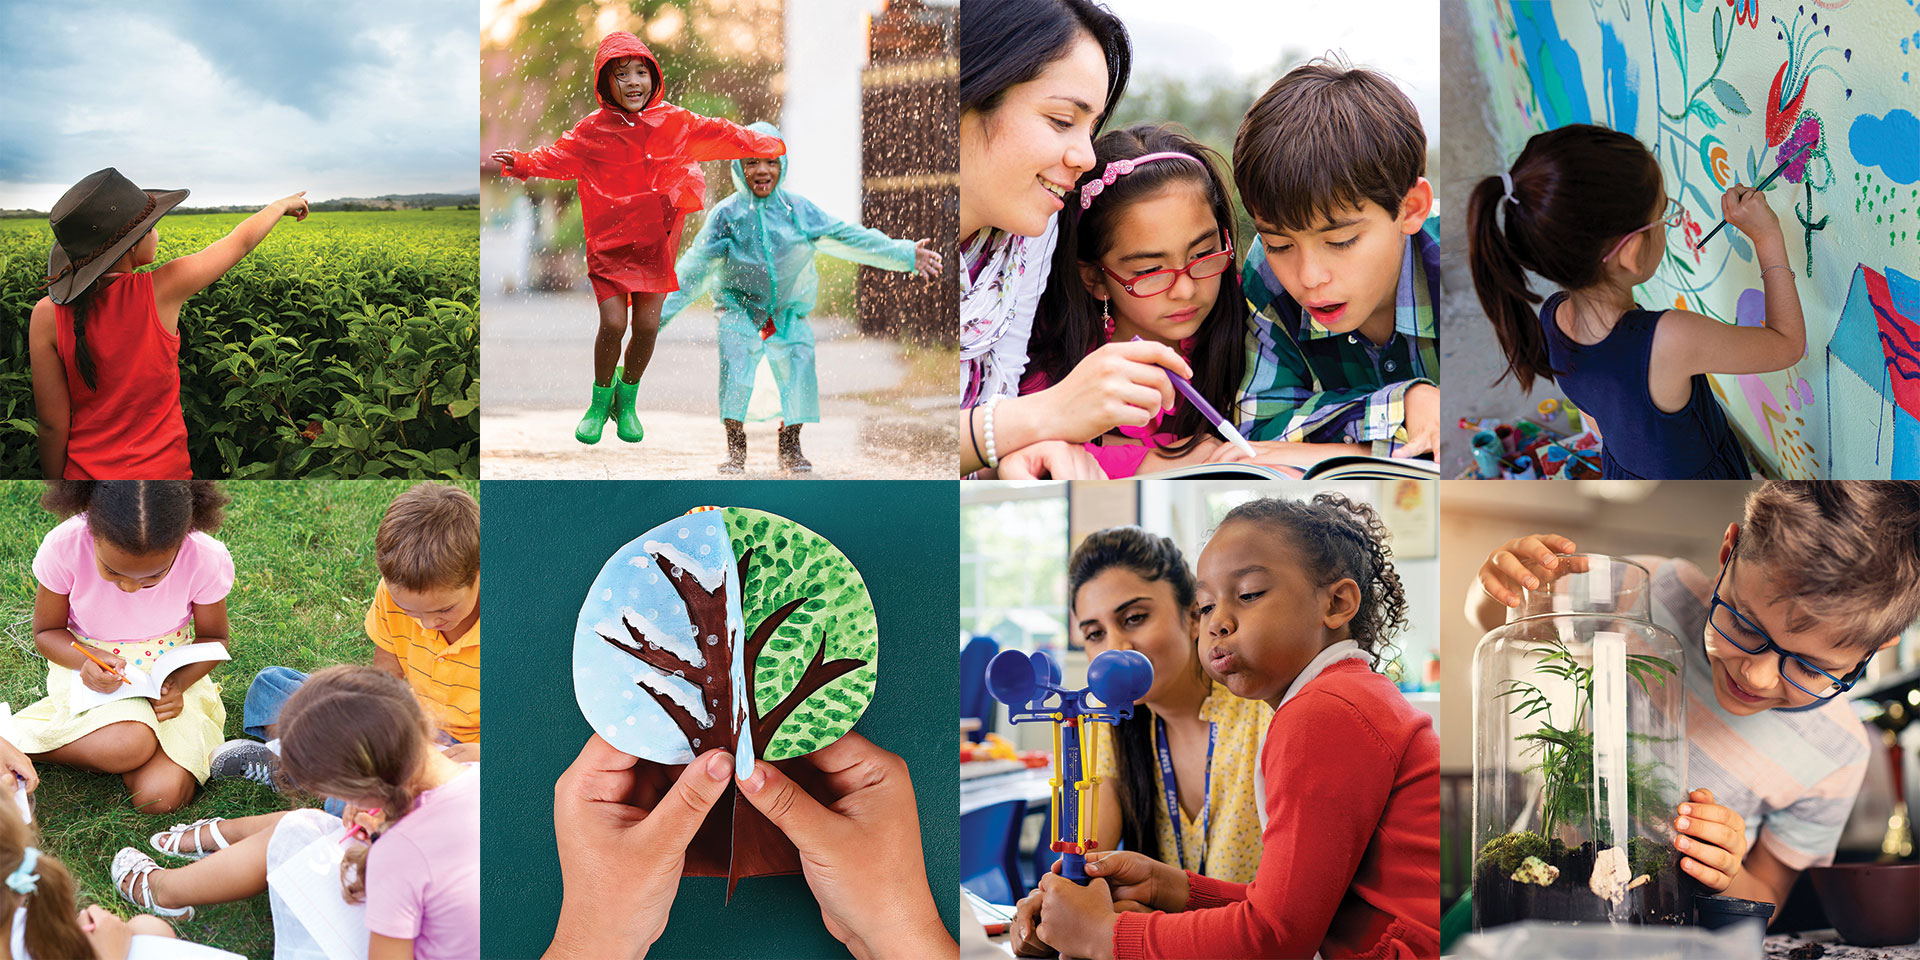 Mosaic of multicultural kids doing weather and climate-related activities